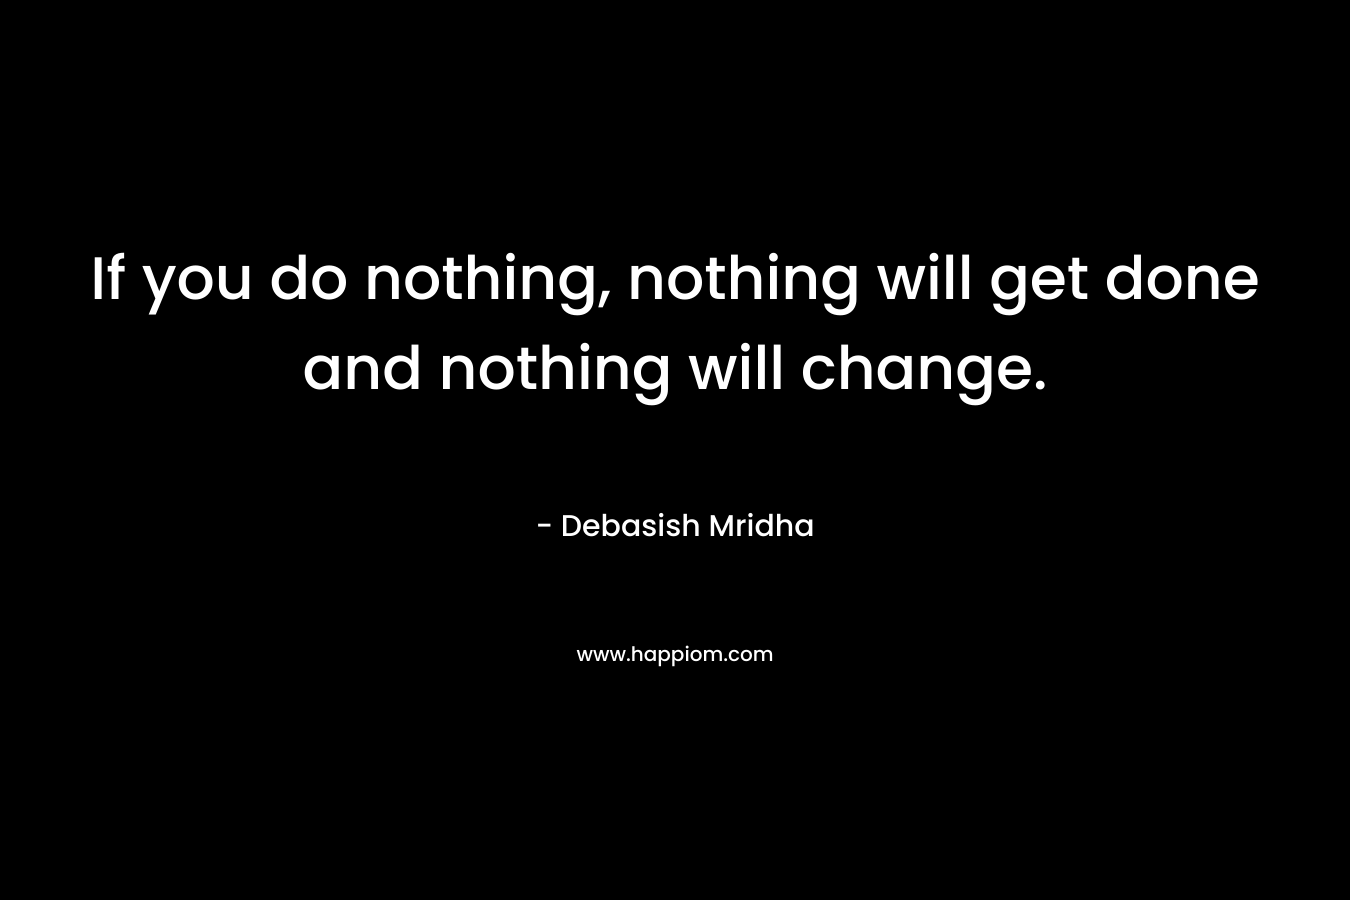 If you do nothing, nothing will get done and nothing will change.